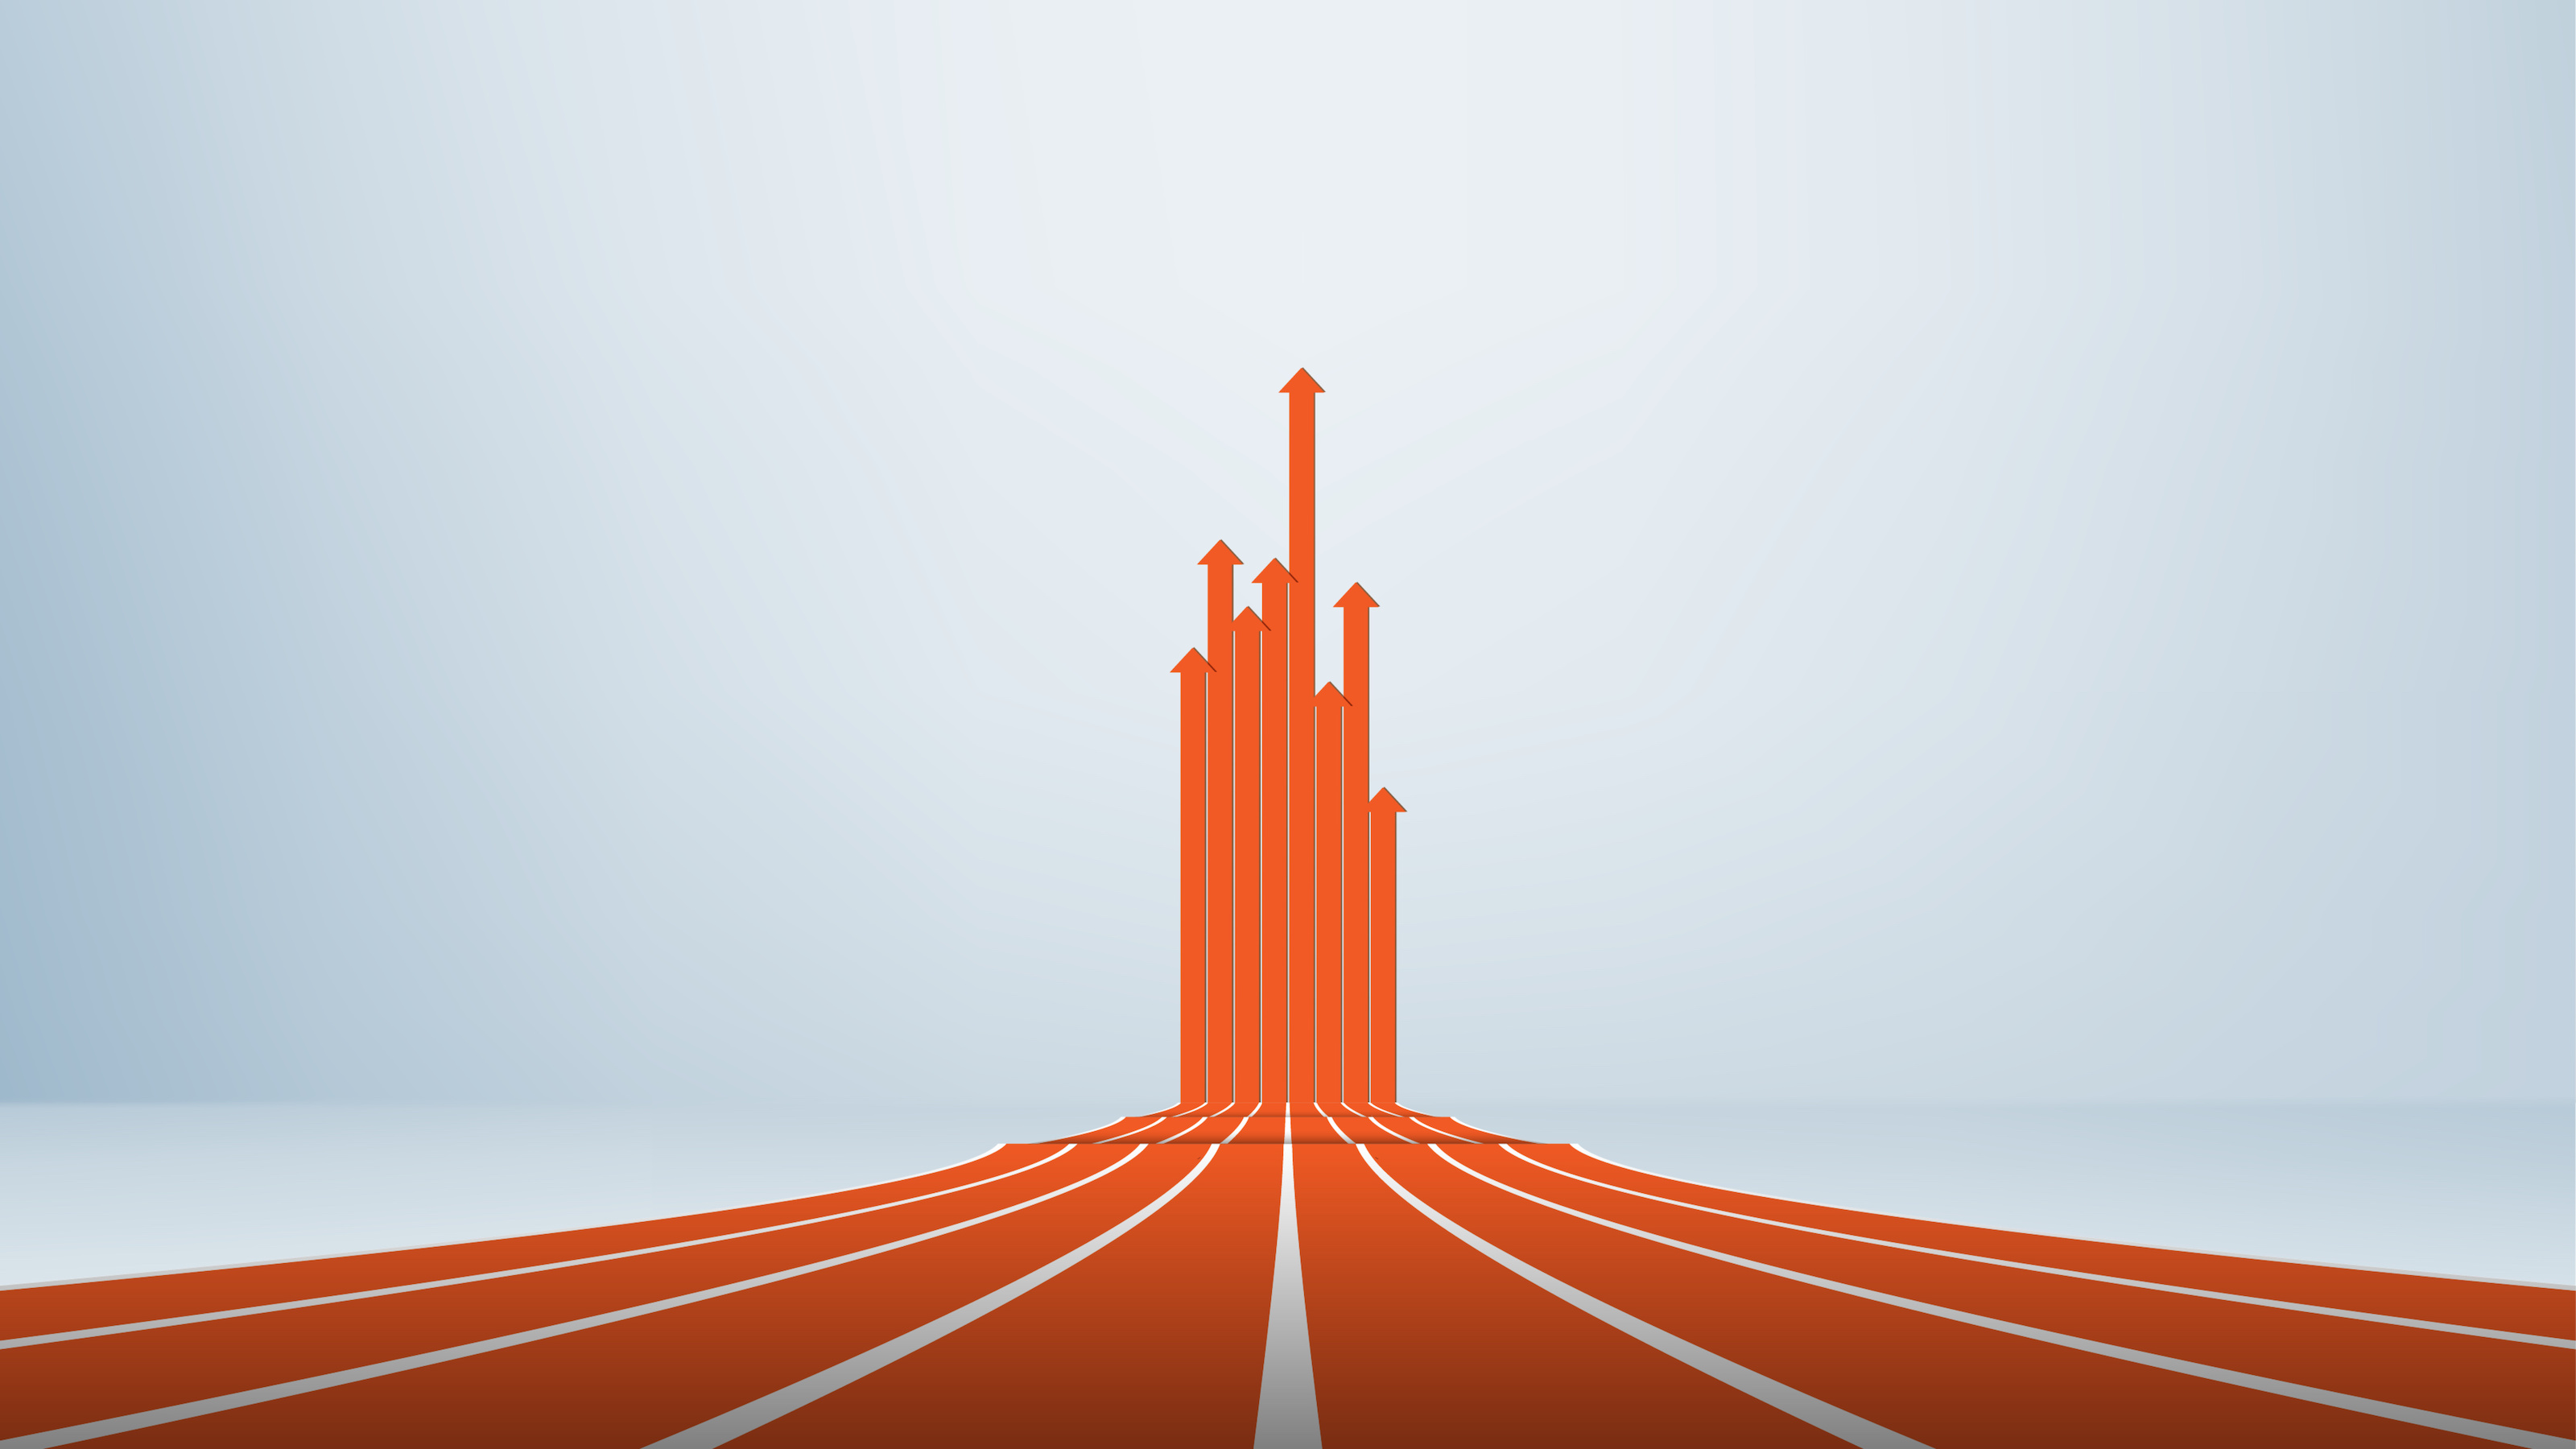 Abstract illustration of orange arrows soaring upwards from converging lines, symbolizing growth, progress, or success.